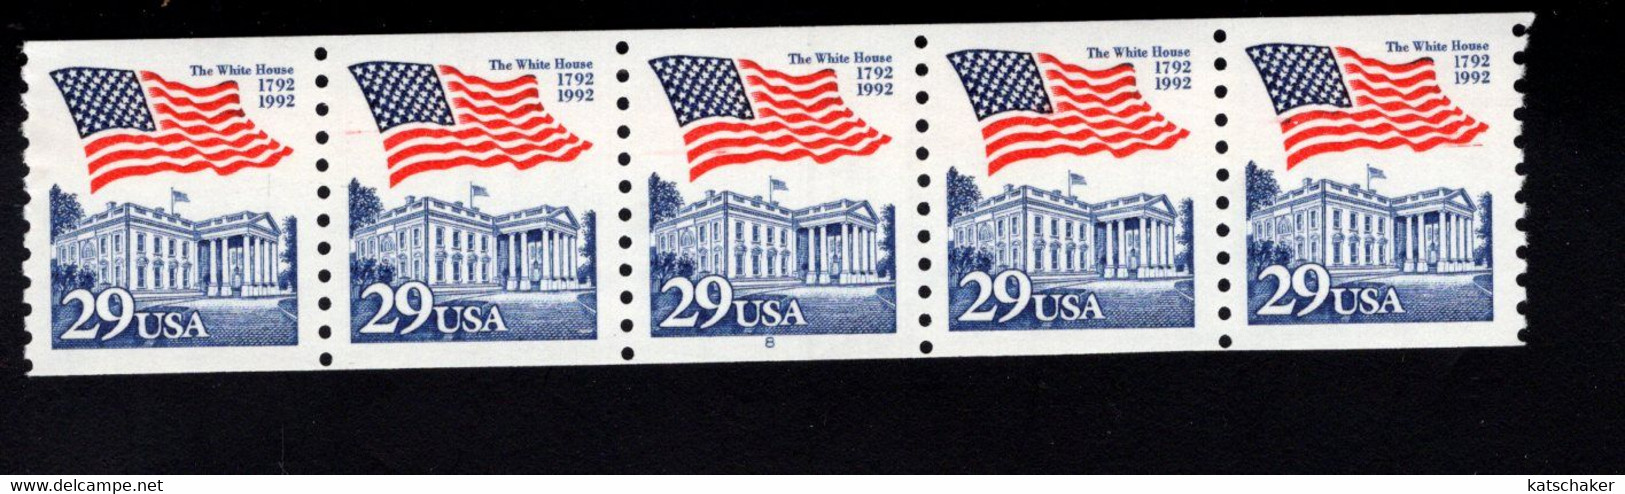 310987571 1992 (XX)  SCOTT 2609 PCN  POSTFRIS MINT NEVER HINGED  - FLAG OVER WHITE HOUSE - Coils (Plate Numbers)